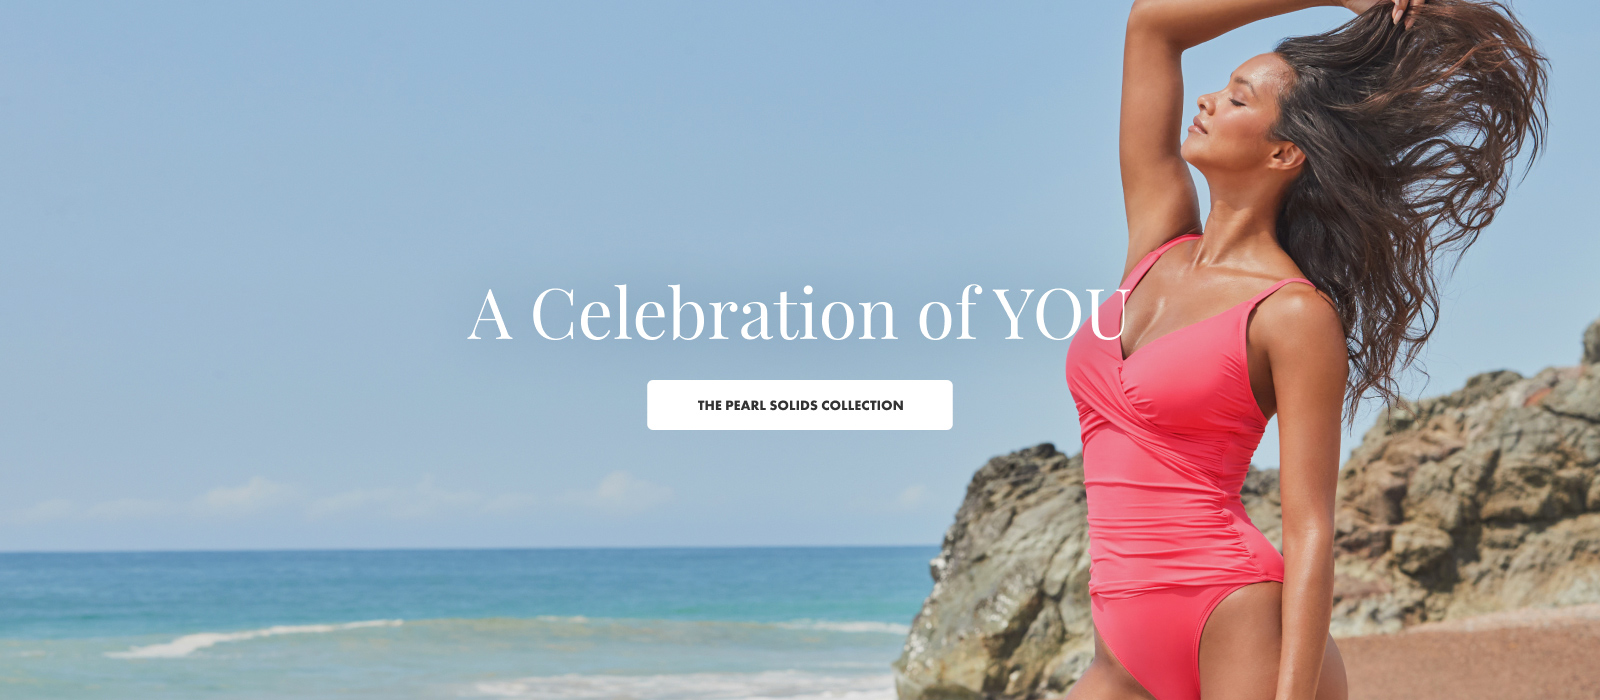 A Celebration of You: The Pearl Solids Collection